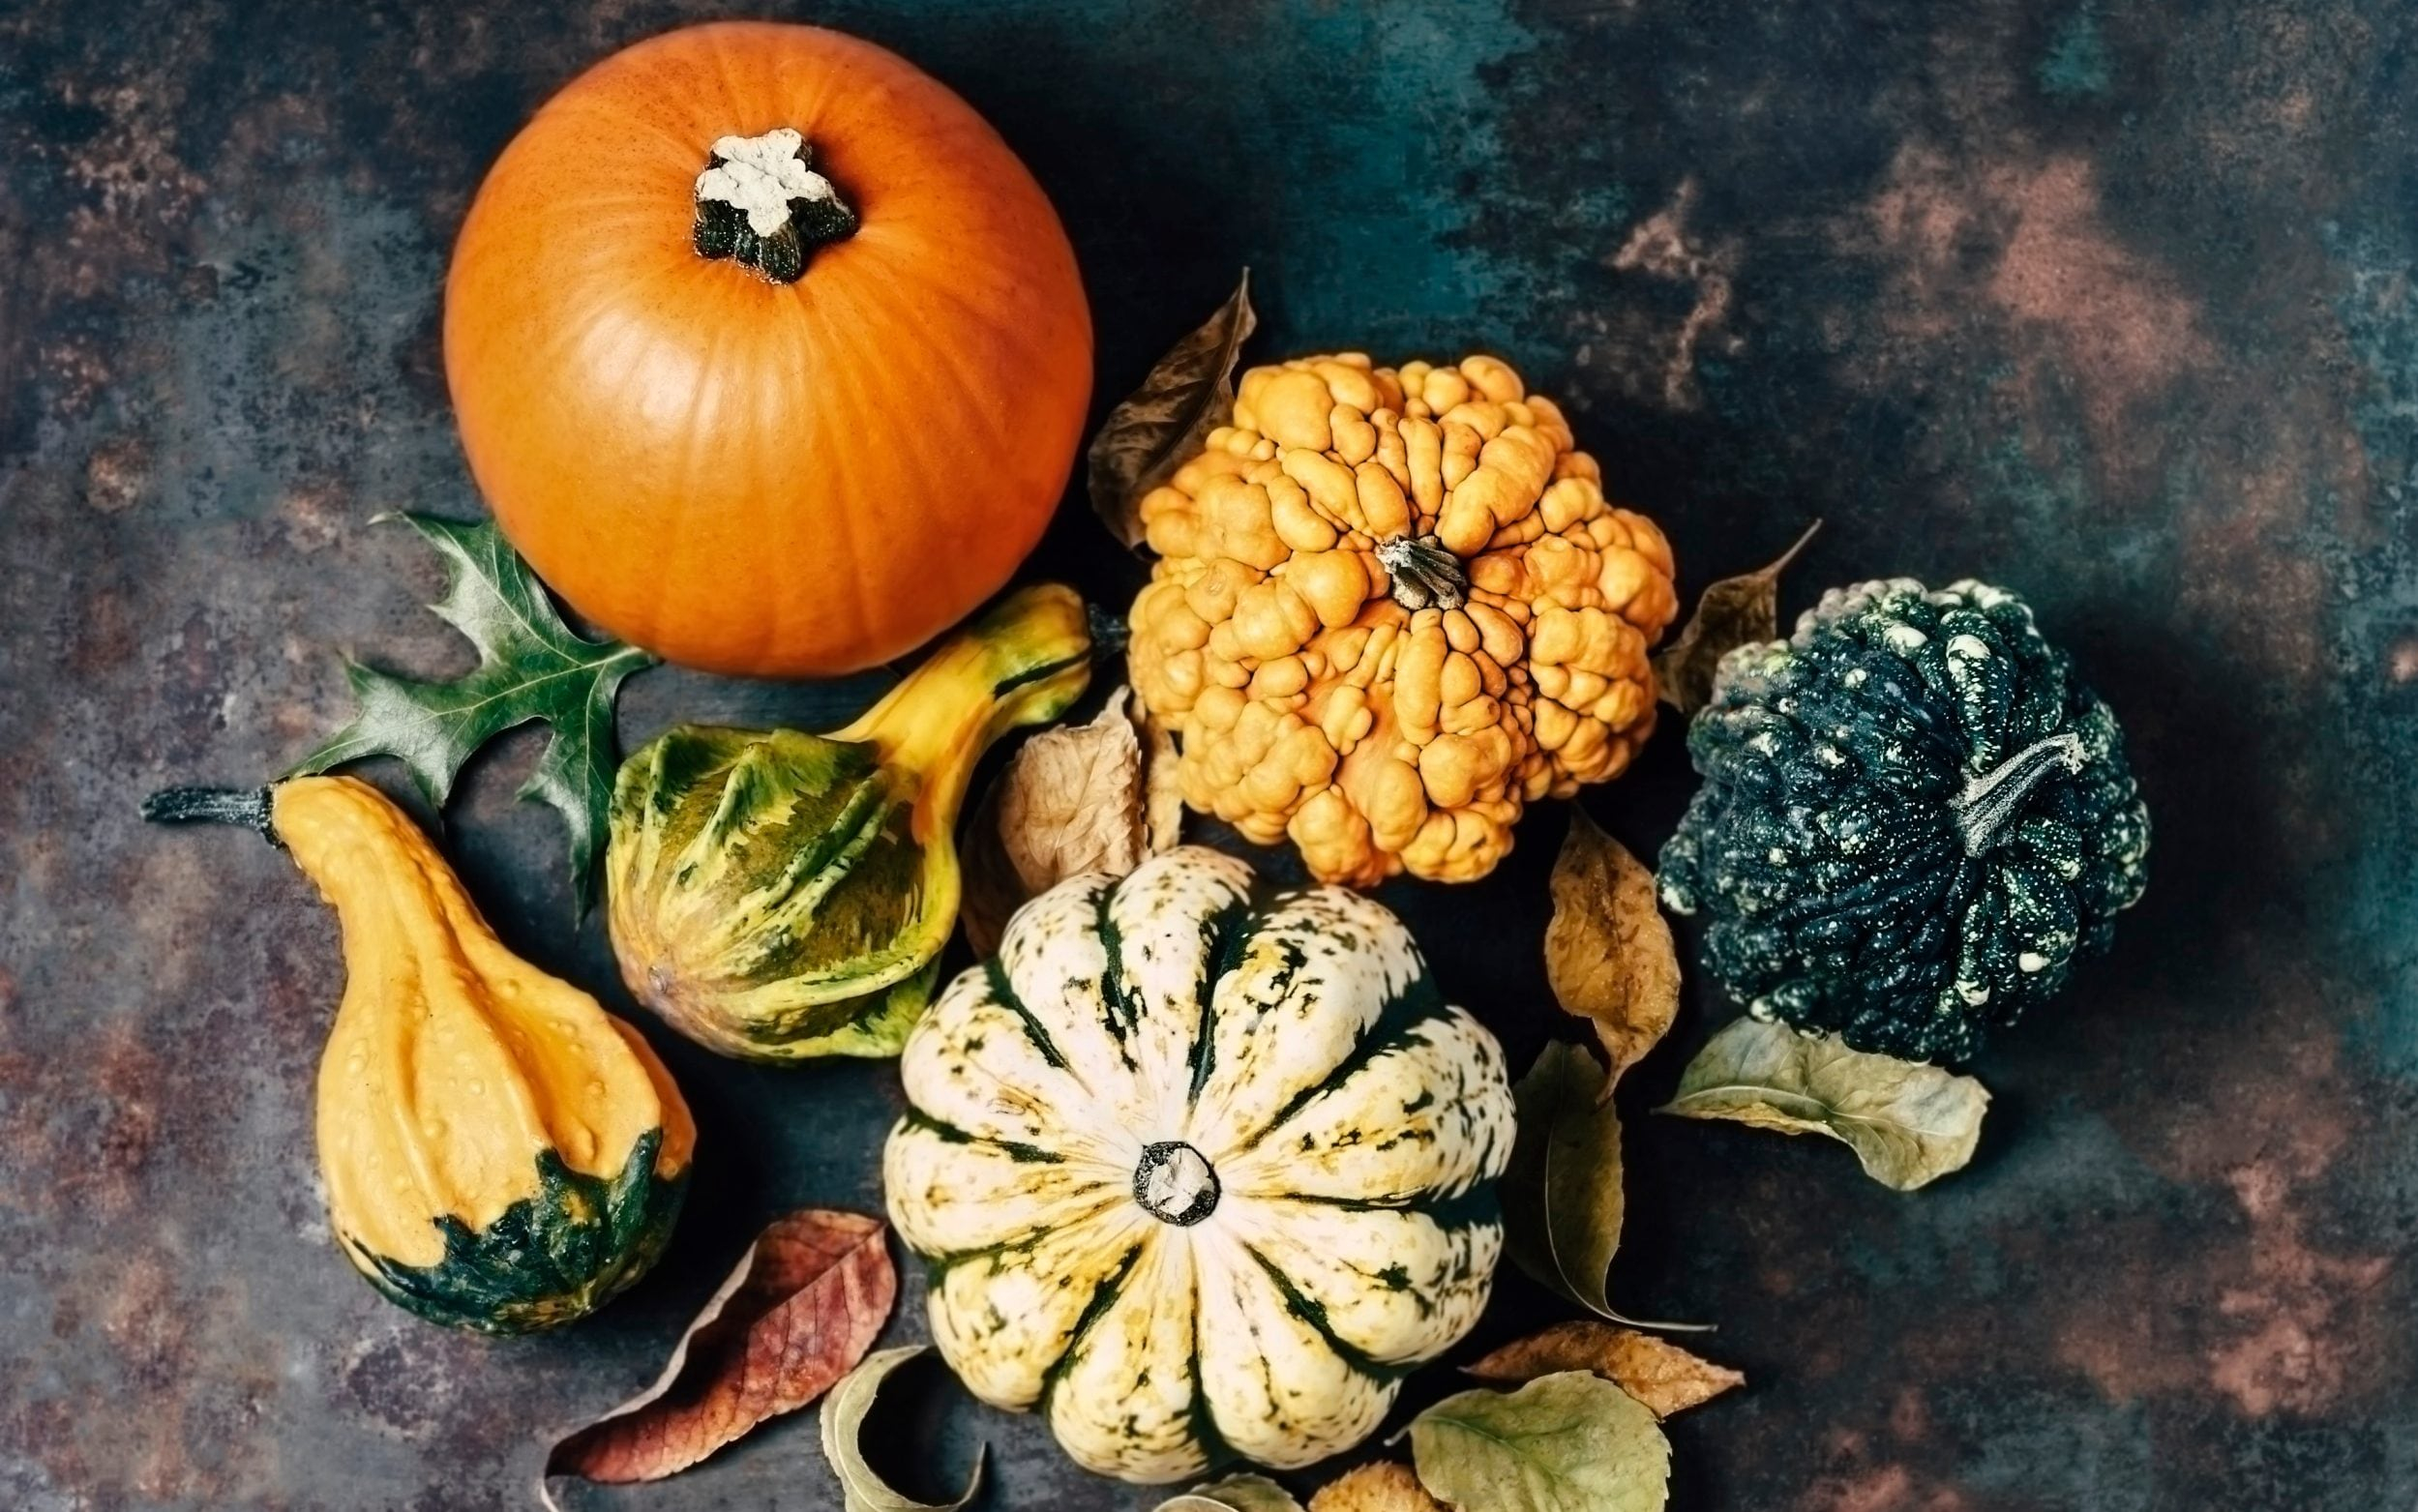 How To Grow And Carve Halloween Pumpkins | The Telegraph